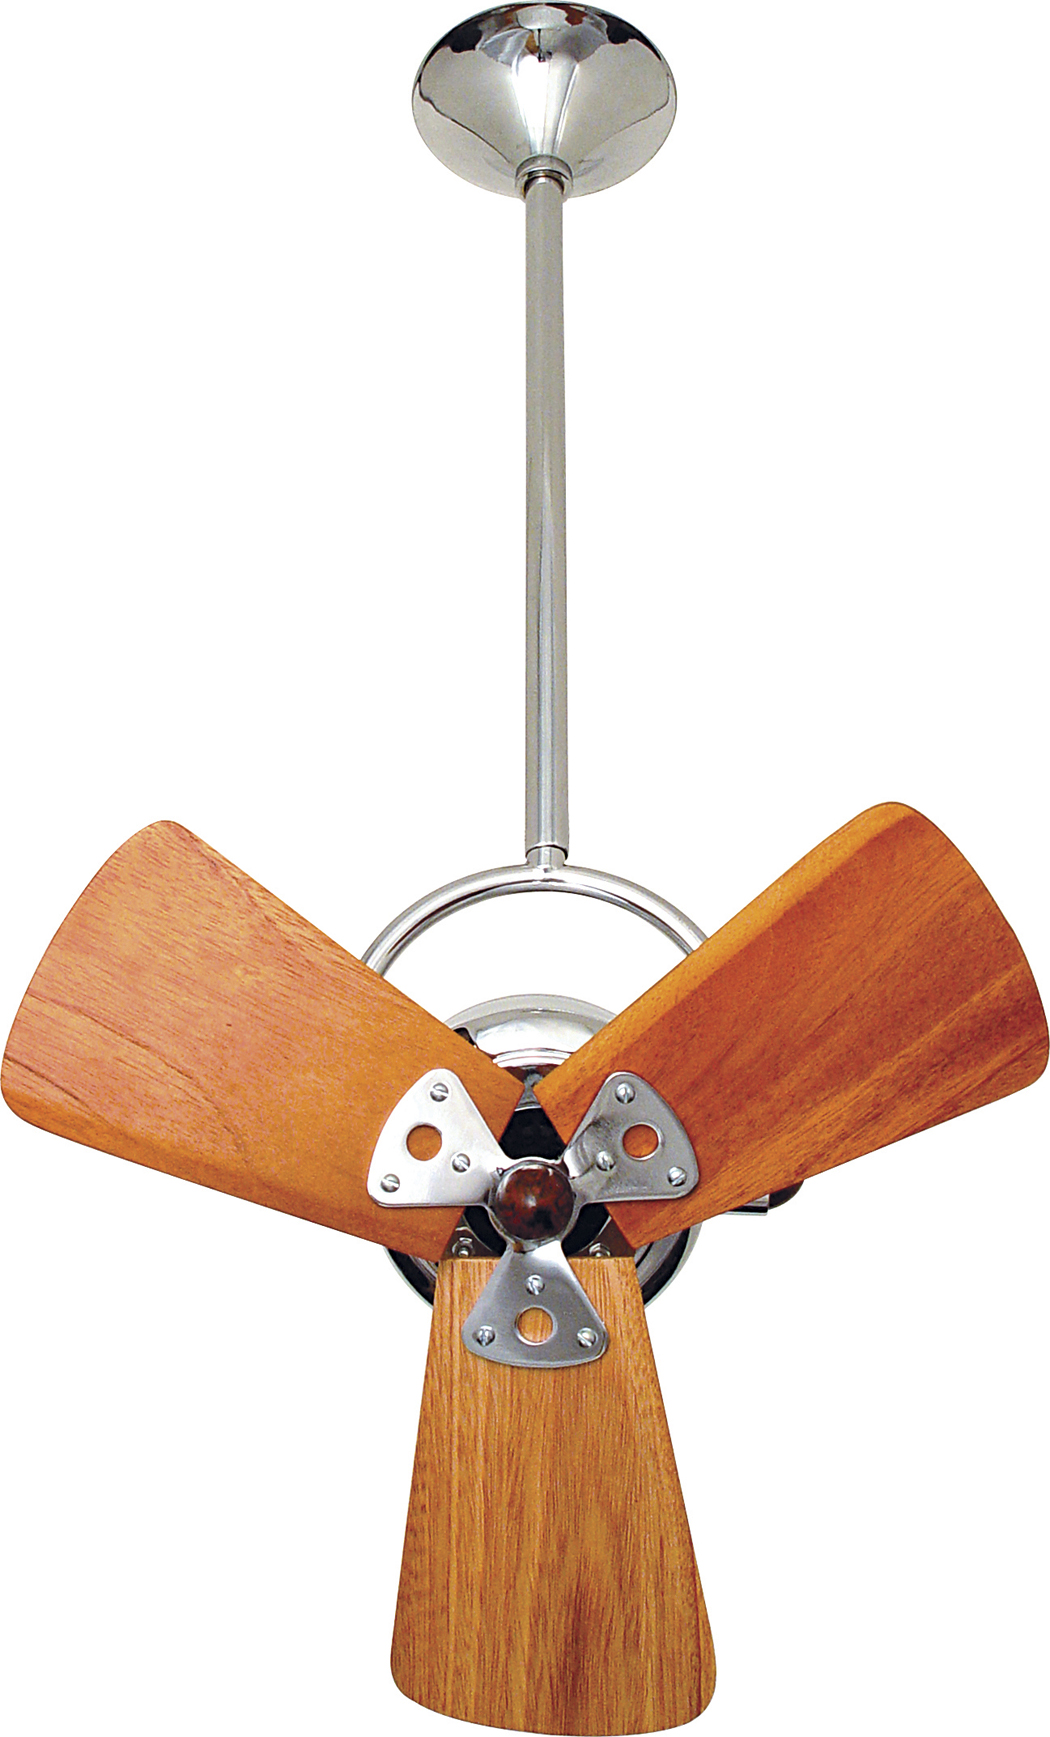 Bianca Direcional ceiling fan in Polished Chrome with Mahogany wood blades made by Matthews Fan Company.